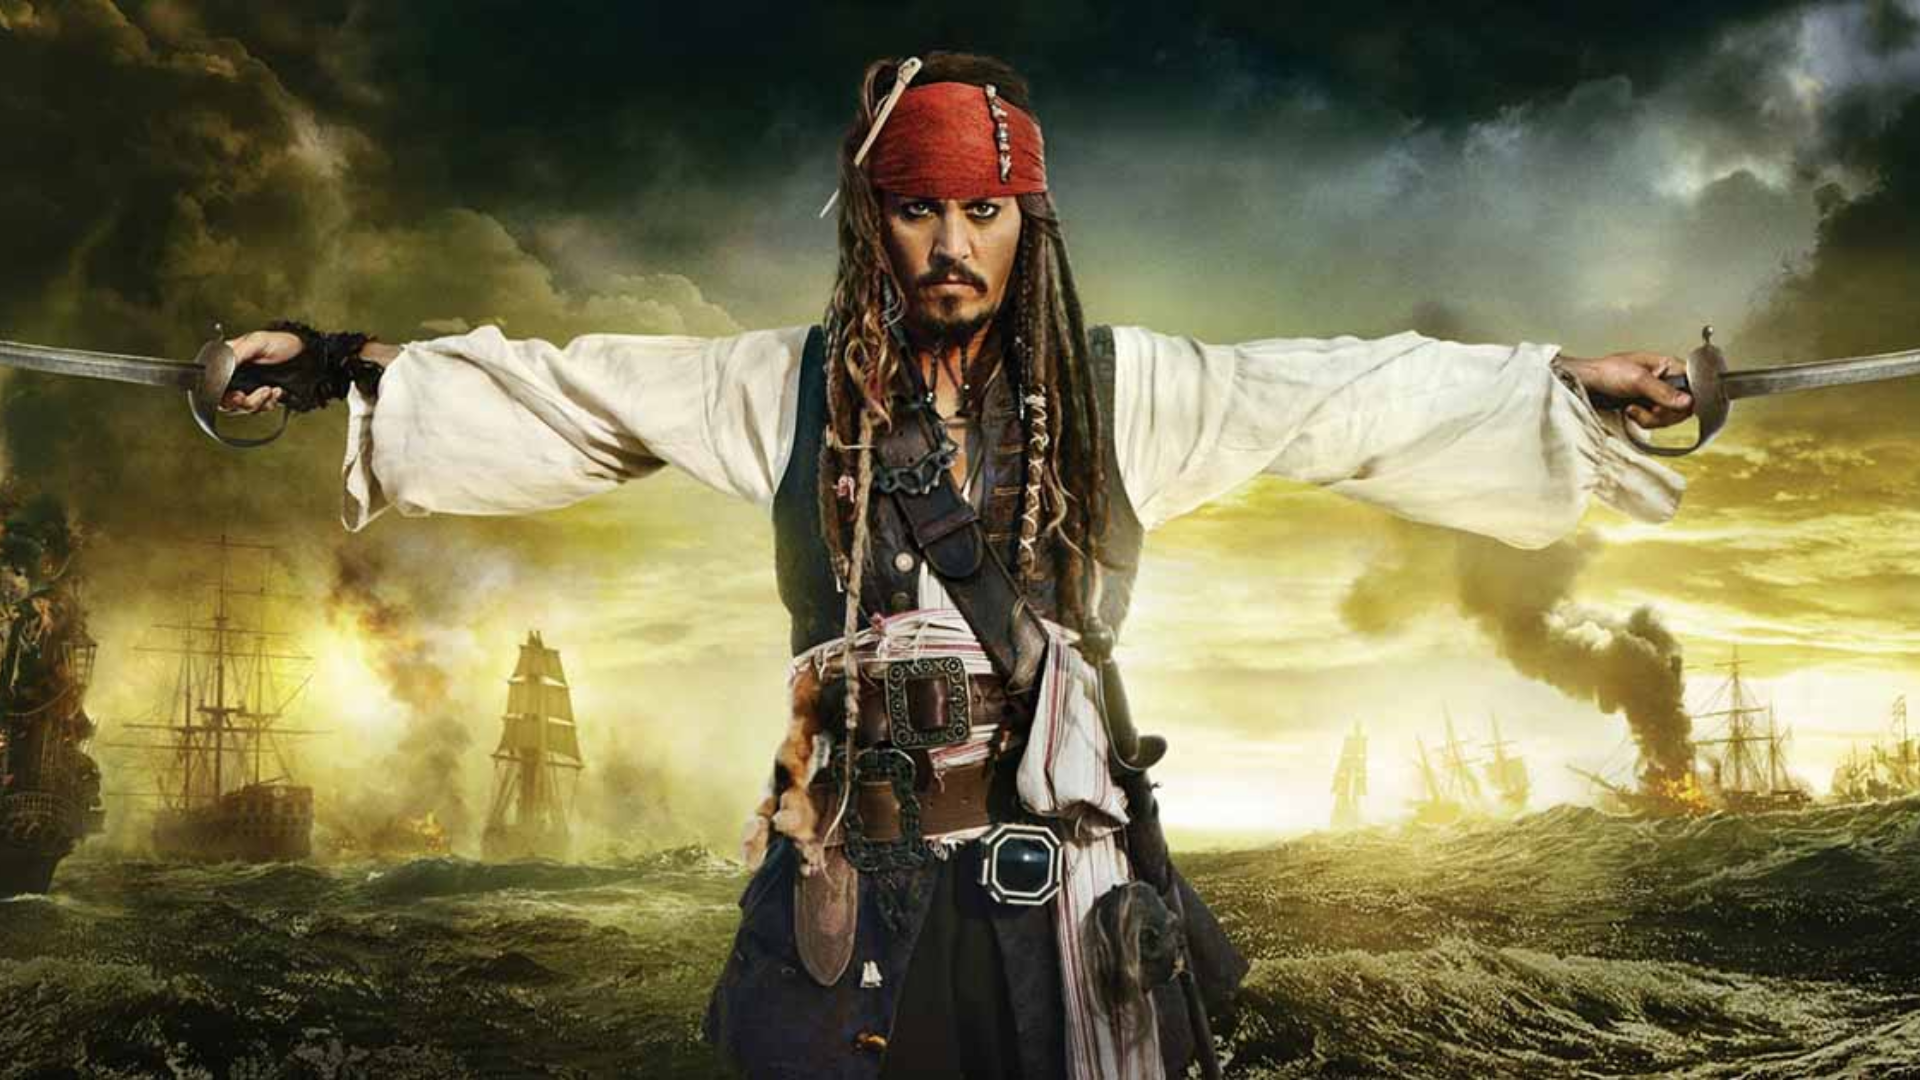 Is Johnny Depp Returning To ‘Pirates Of The Caribbean’ Reboot? Margot Robbie’s Spin-Off Officially In The Works